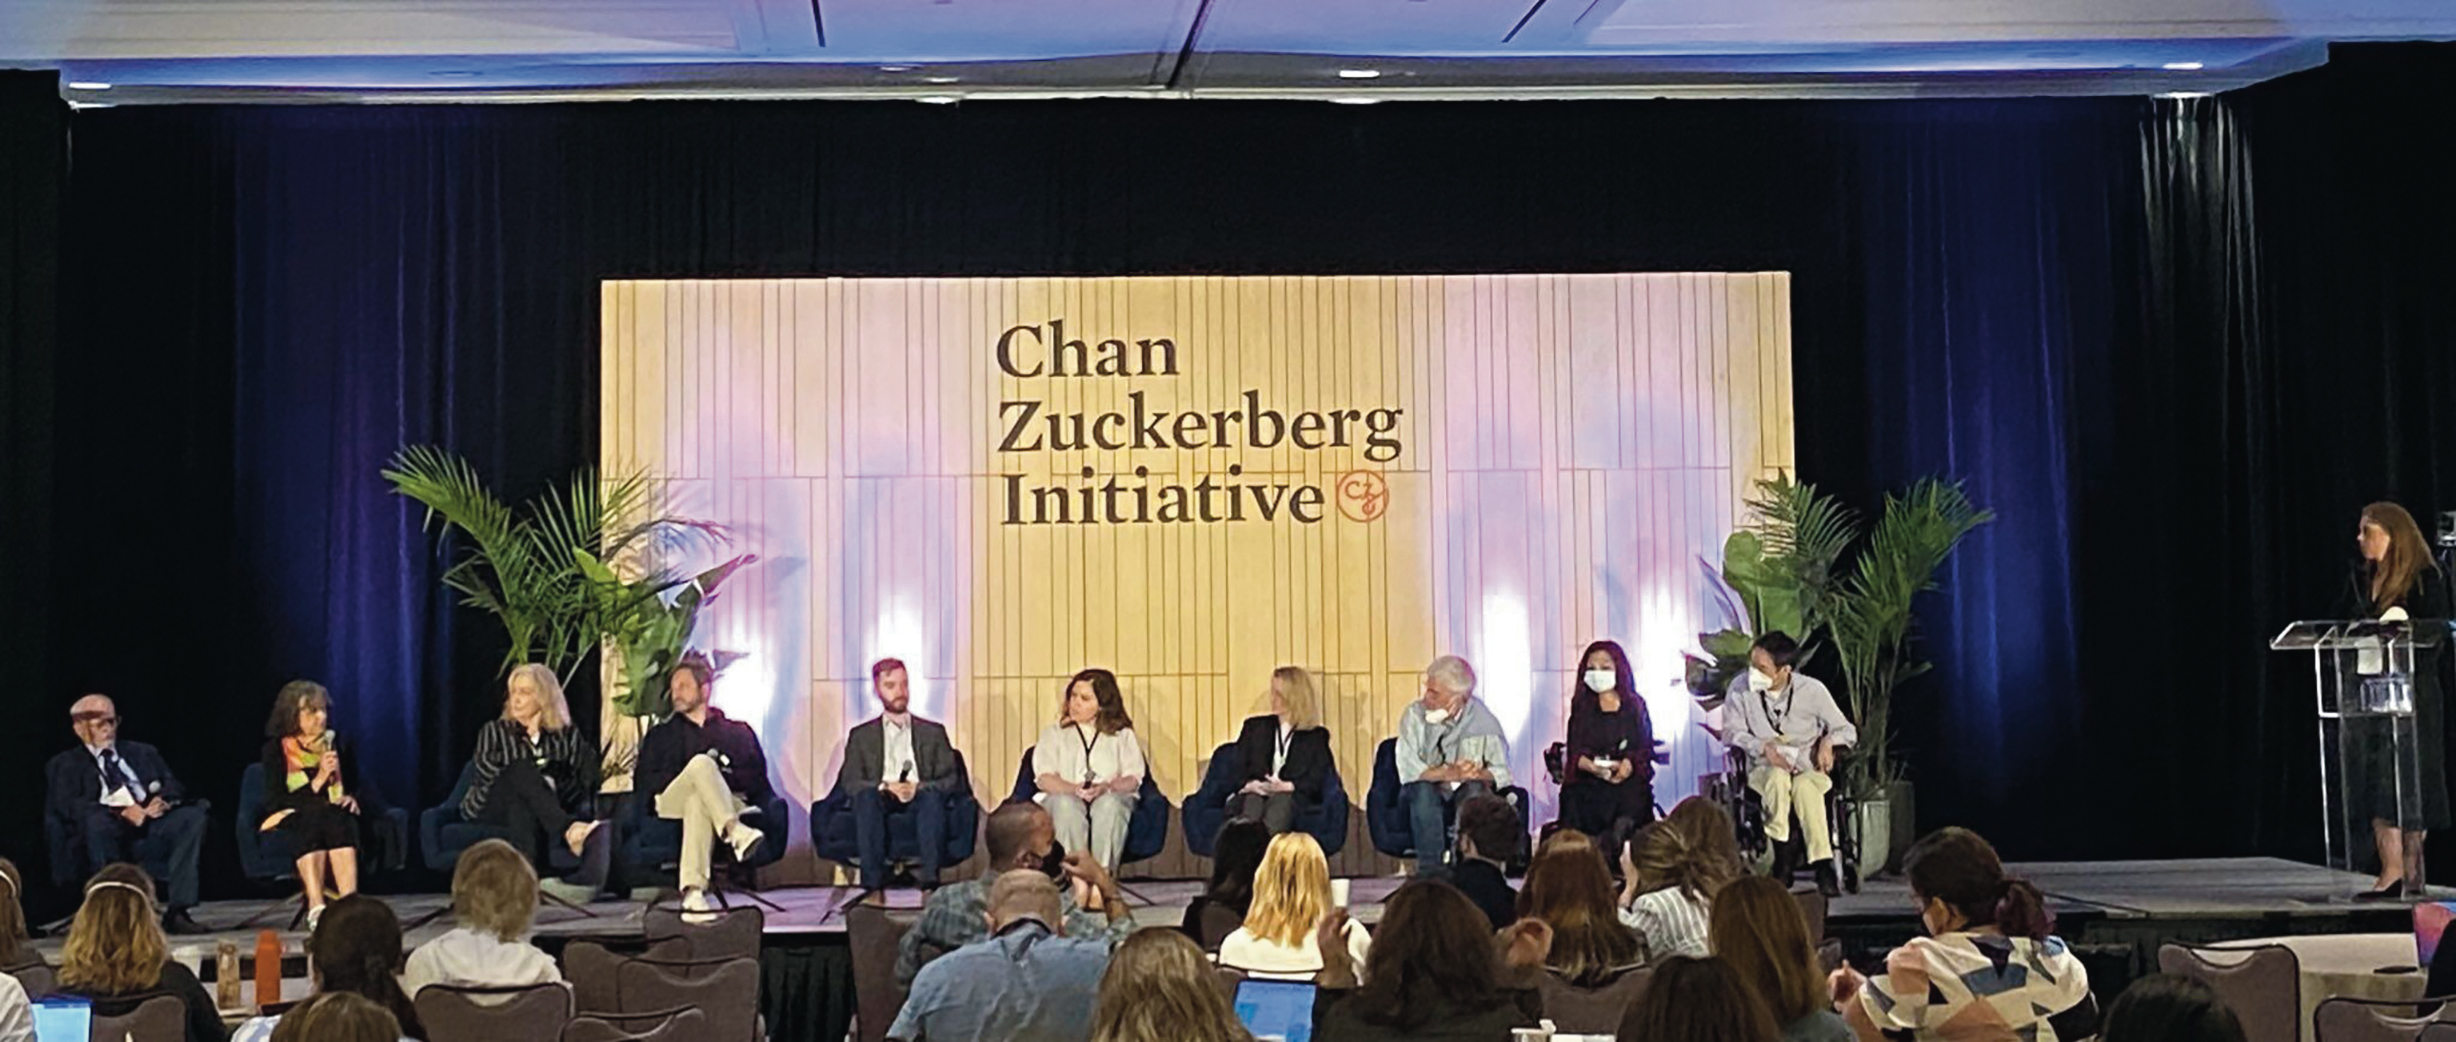 A panel of adult males and females at the Chan Zuckerberg Initiative conference sitting down engaged in a discussion on stage. Two individuals are seated in wheelchairs, several are wearing face masks and holding microphones.